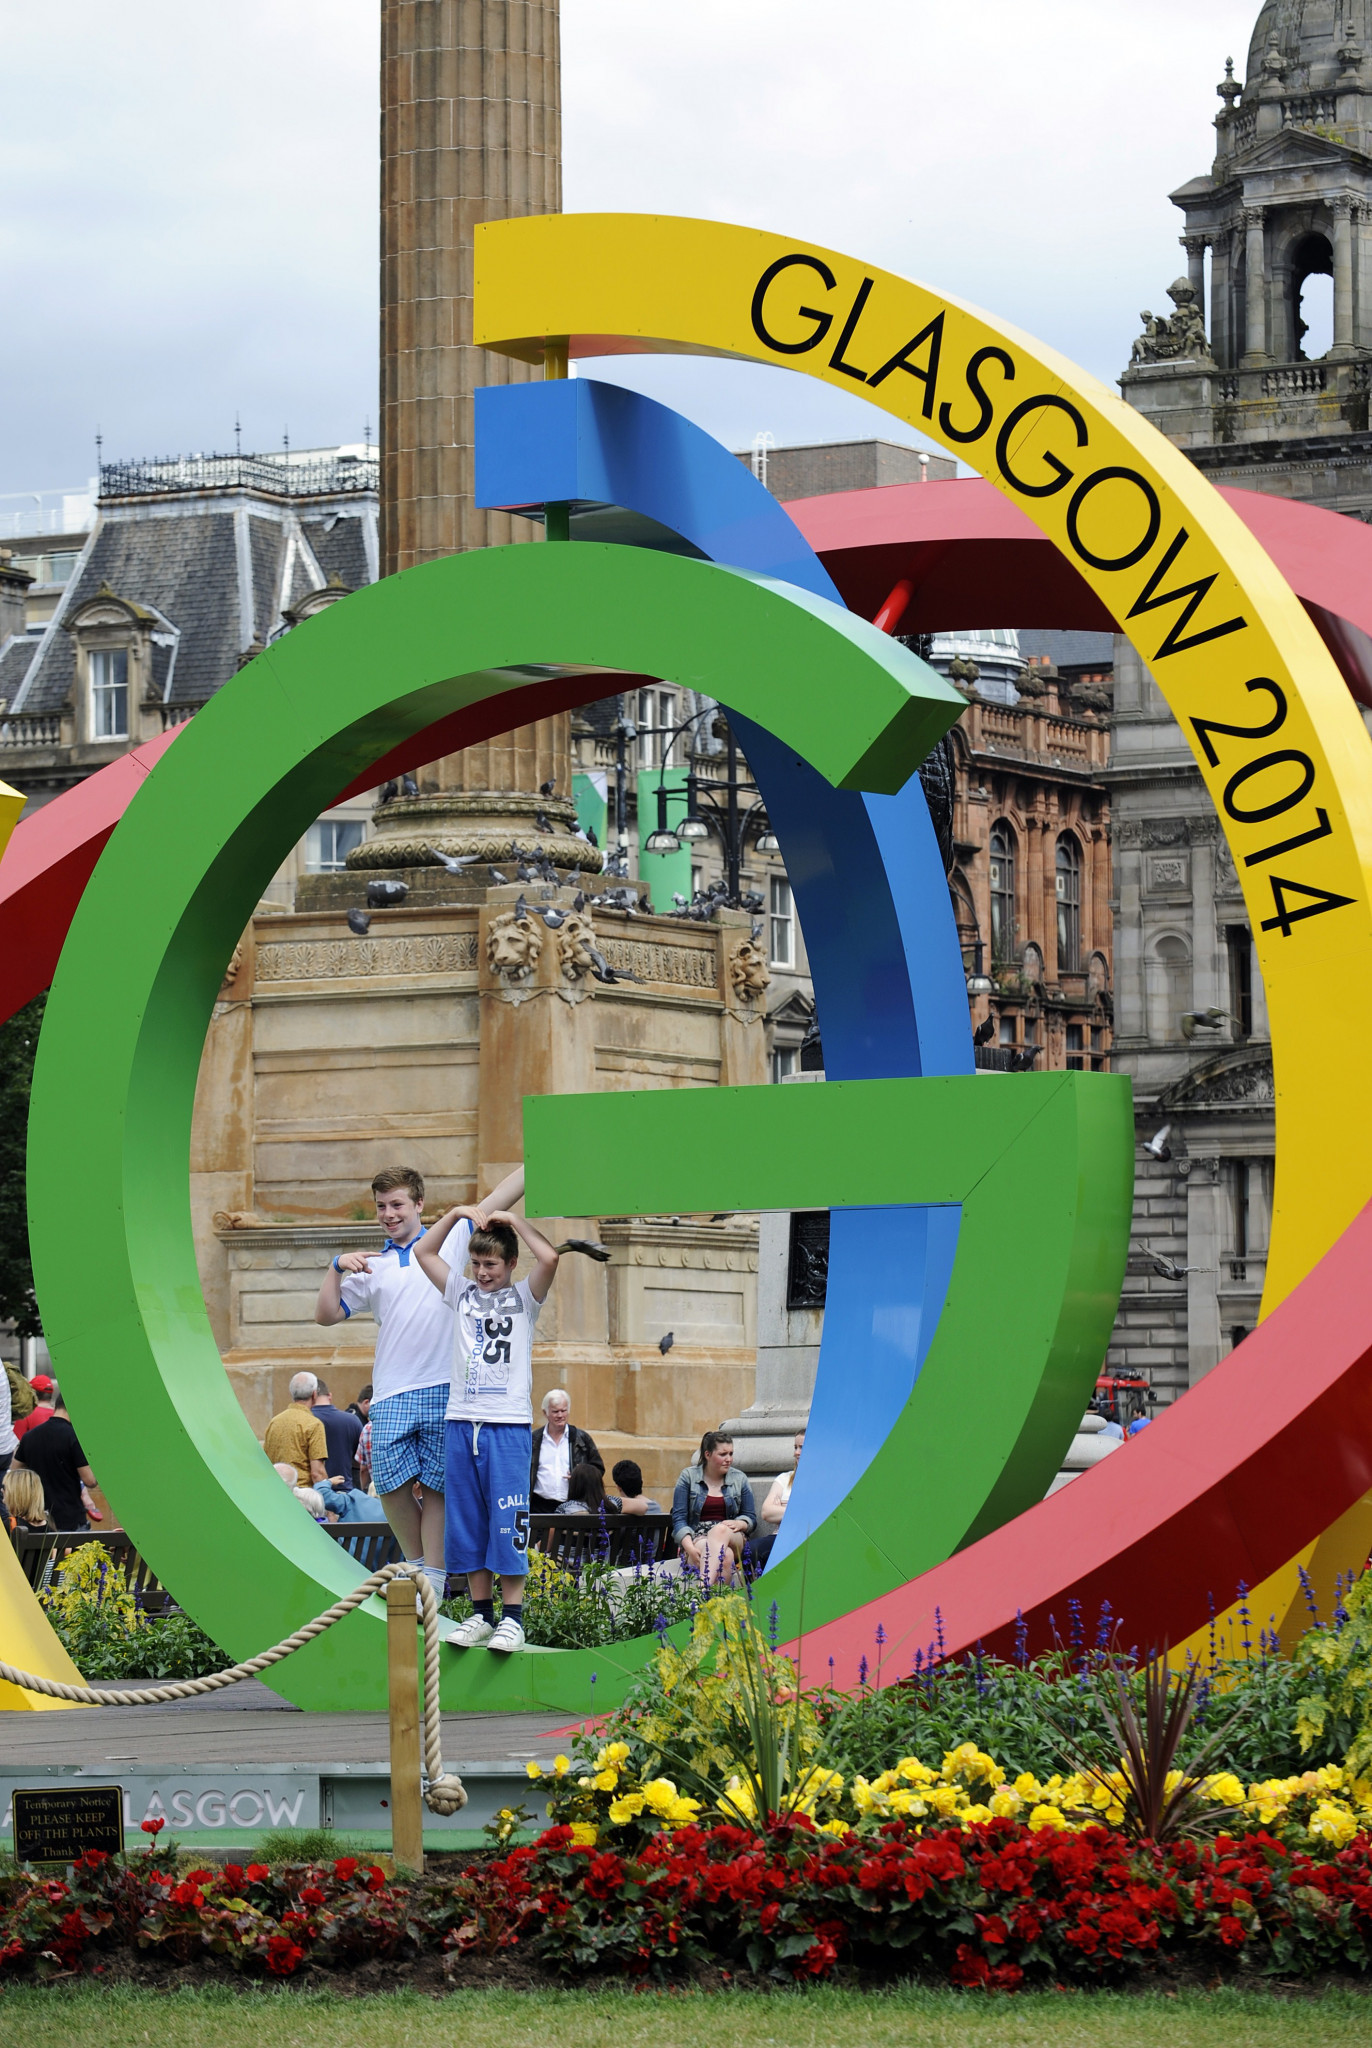 A sculpture known as 'The Big G' is pictured in Glasgow in Scotland,ahead of the start of the 2014 Commonwealth Games ©Getty Images